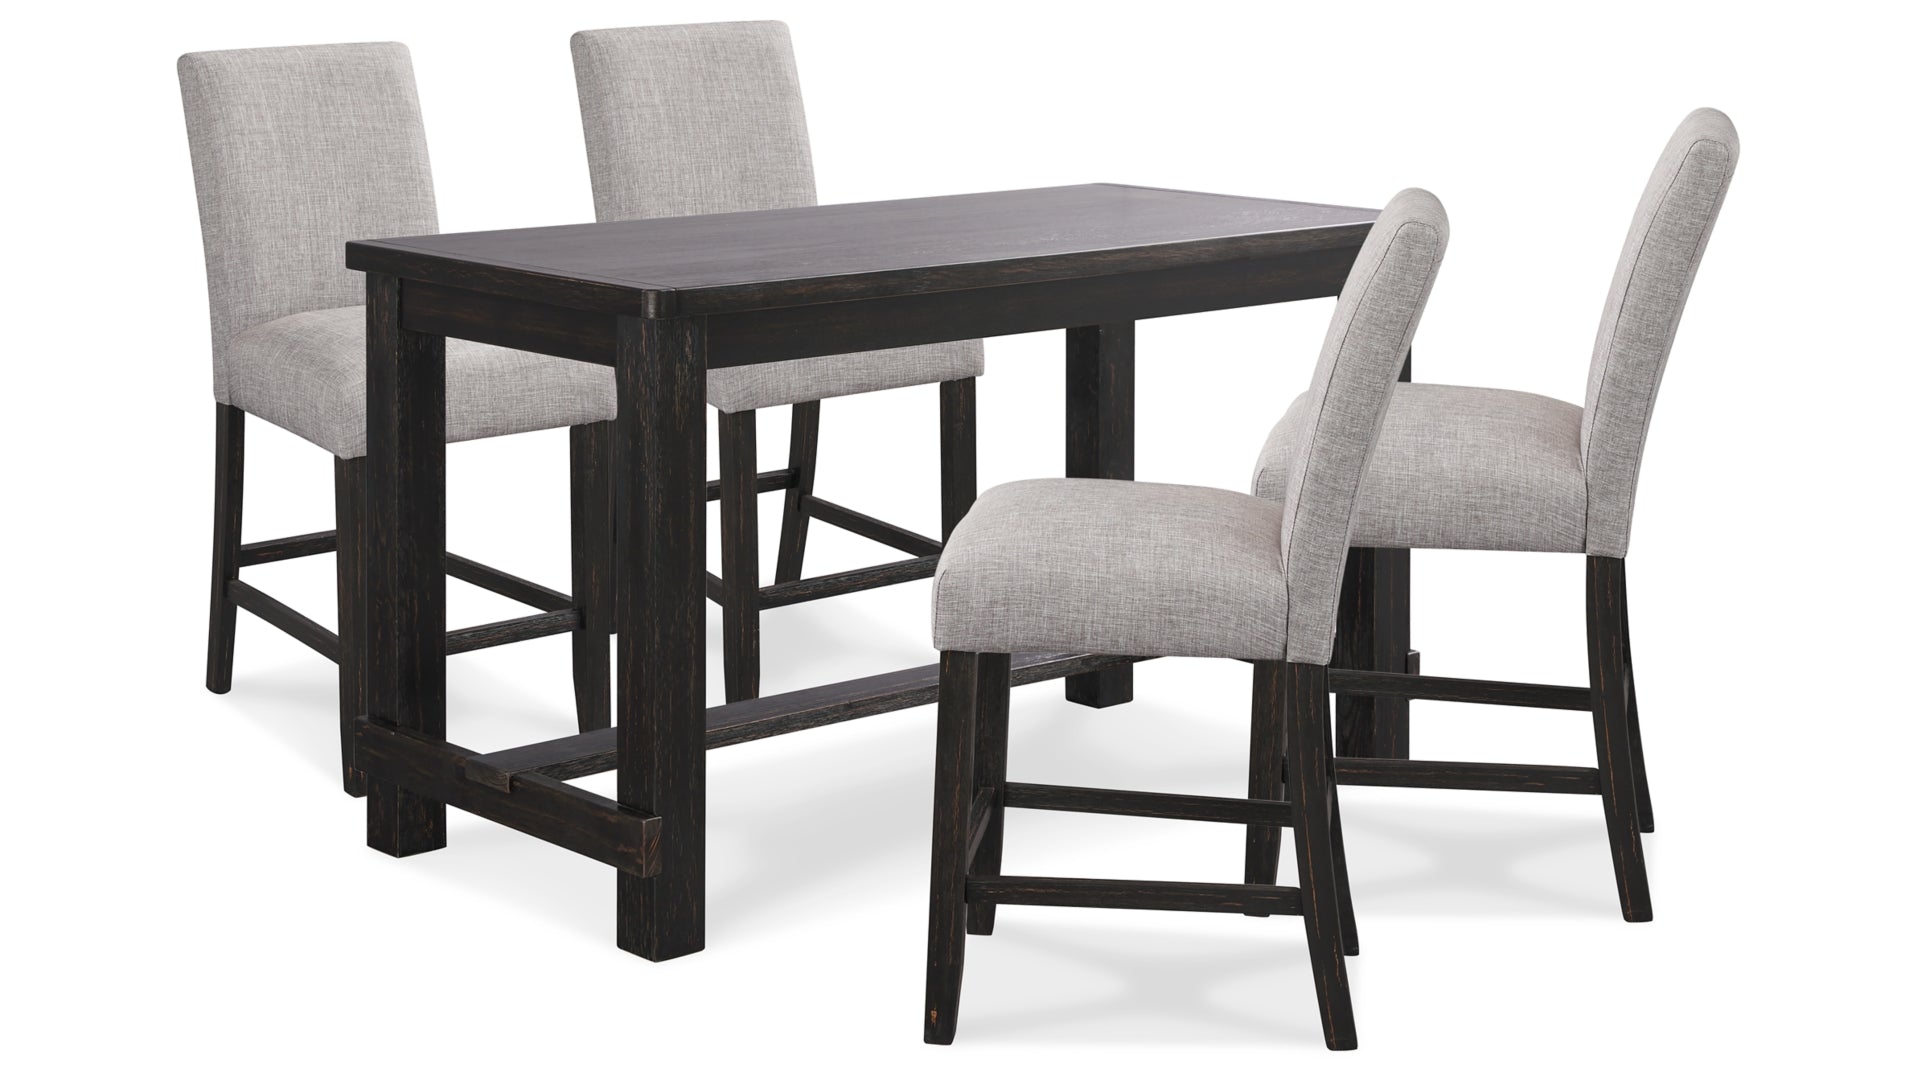 Jeanette Counter Height Dining Table and 4 Barstools